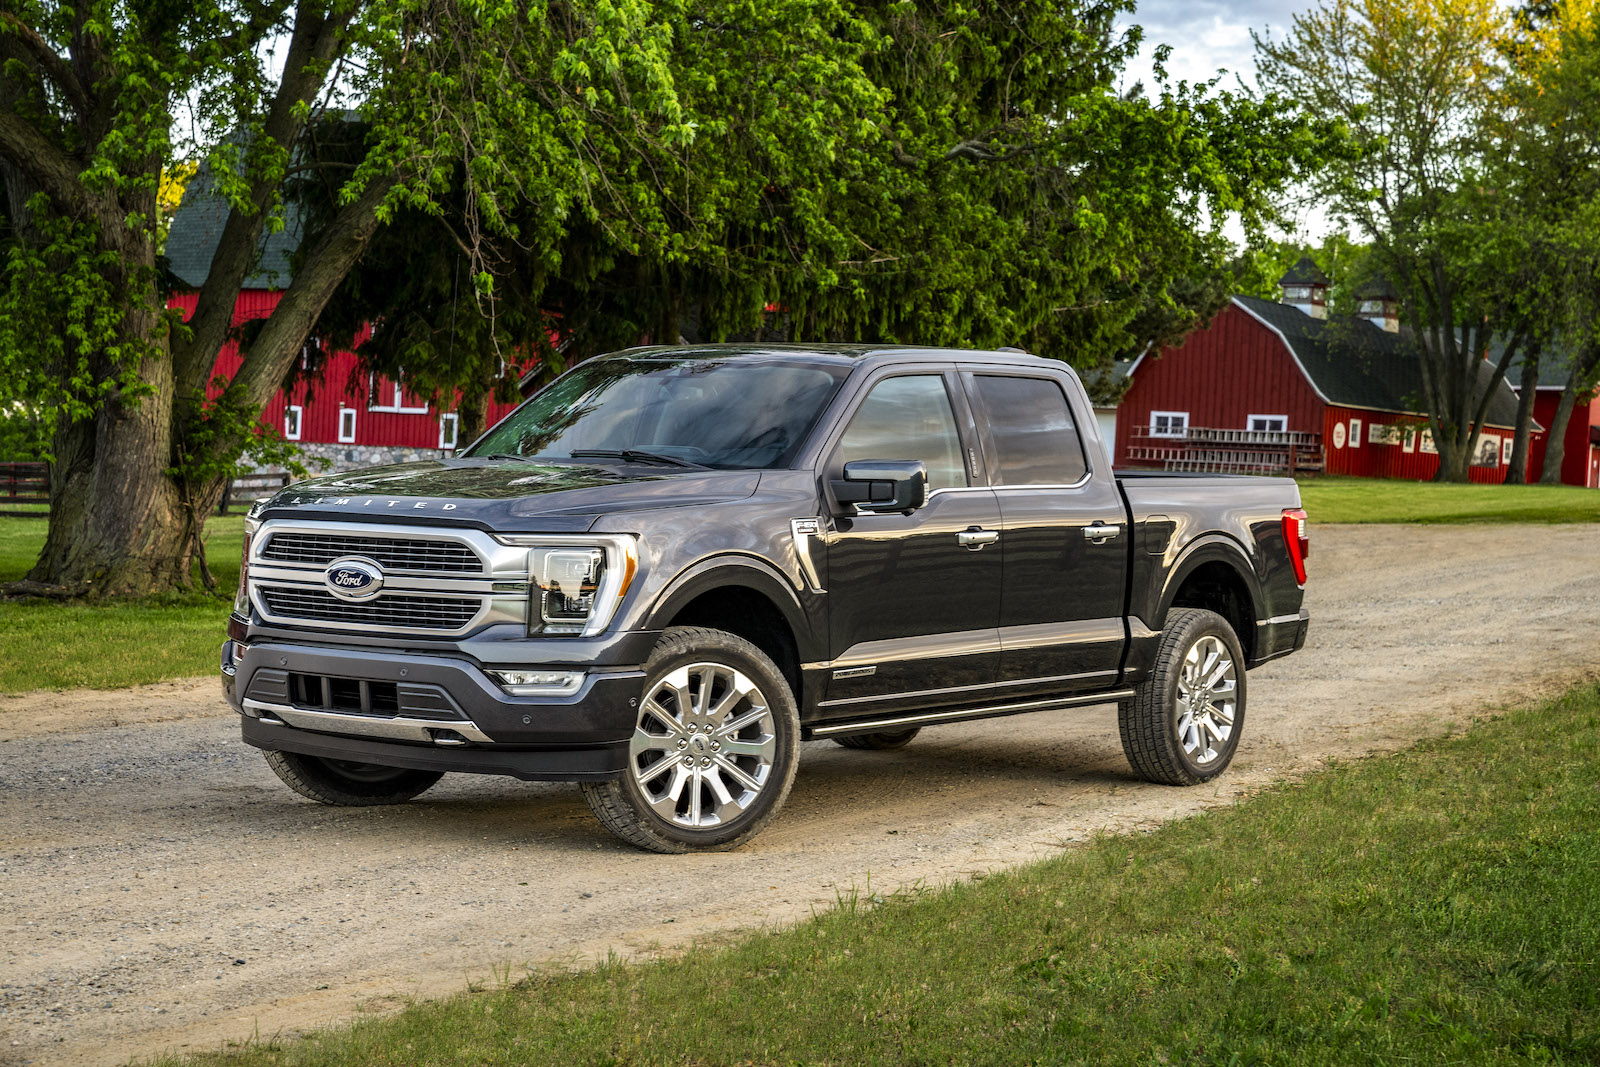 First Look: 2021 Ford F-150 Puts Premium on Power, Features – and Adds